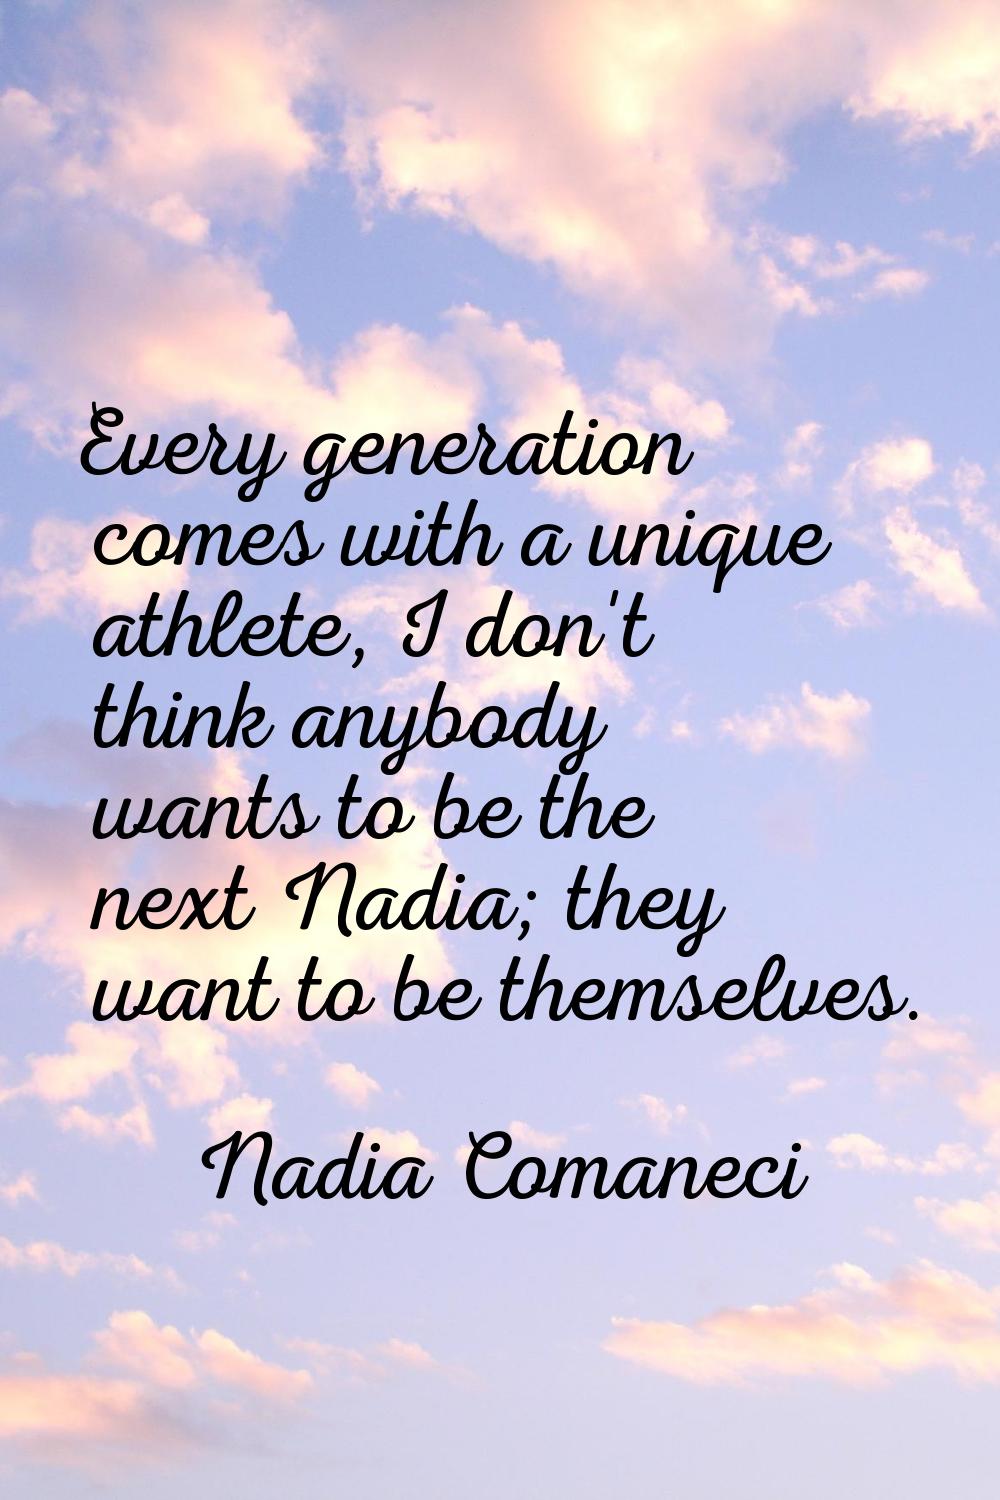 Every generation comes with a unique athlete, I don't think anybody wants to be the next Nadia; the